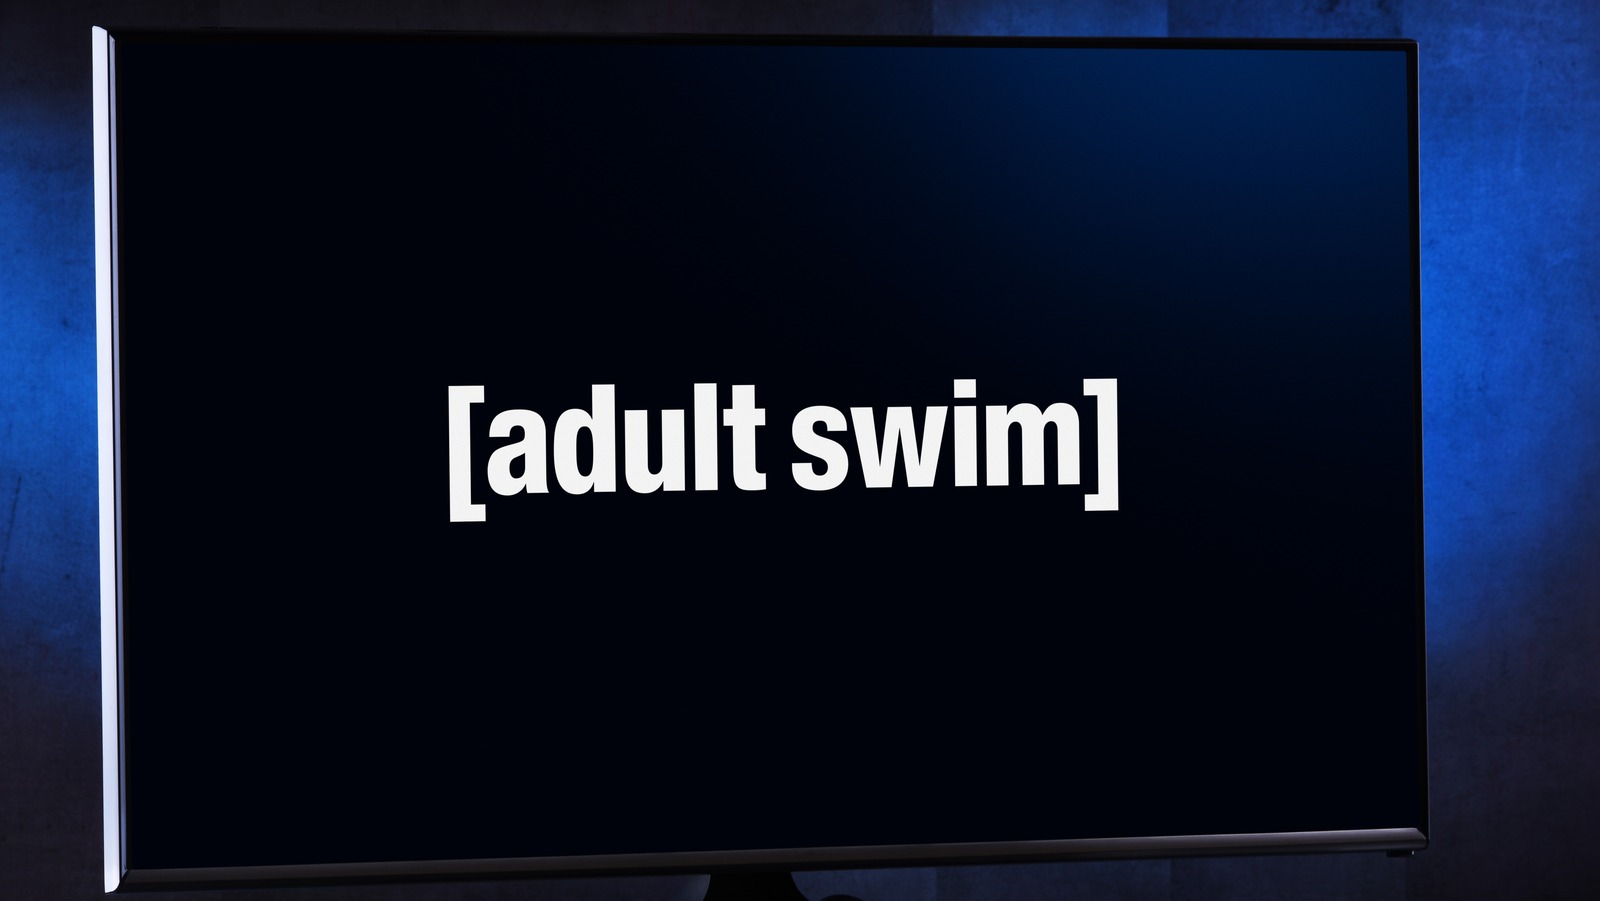 5 Ways To Watch Adult Swim Without A Cable Subscription – SlashGear